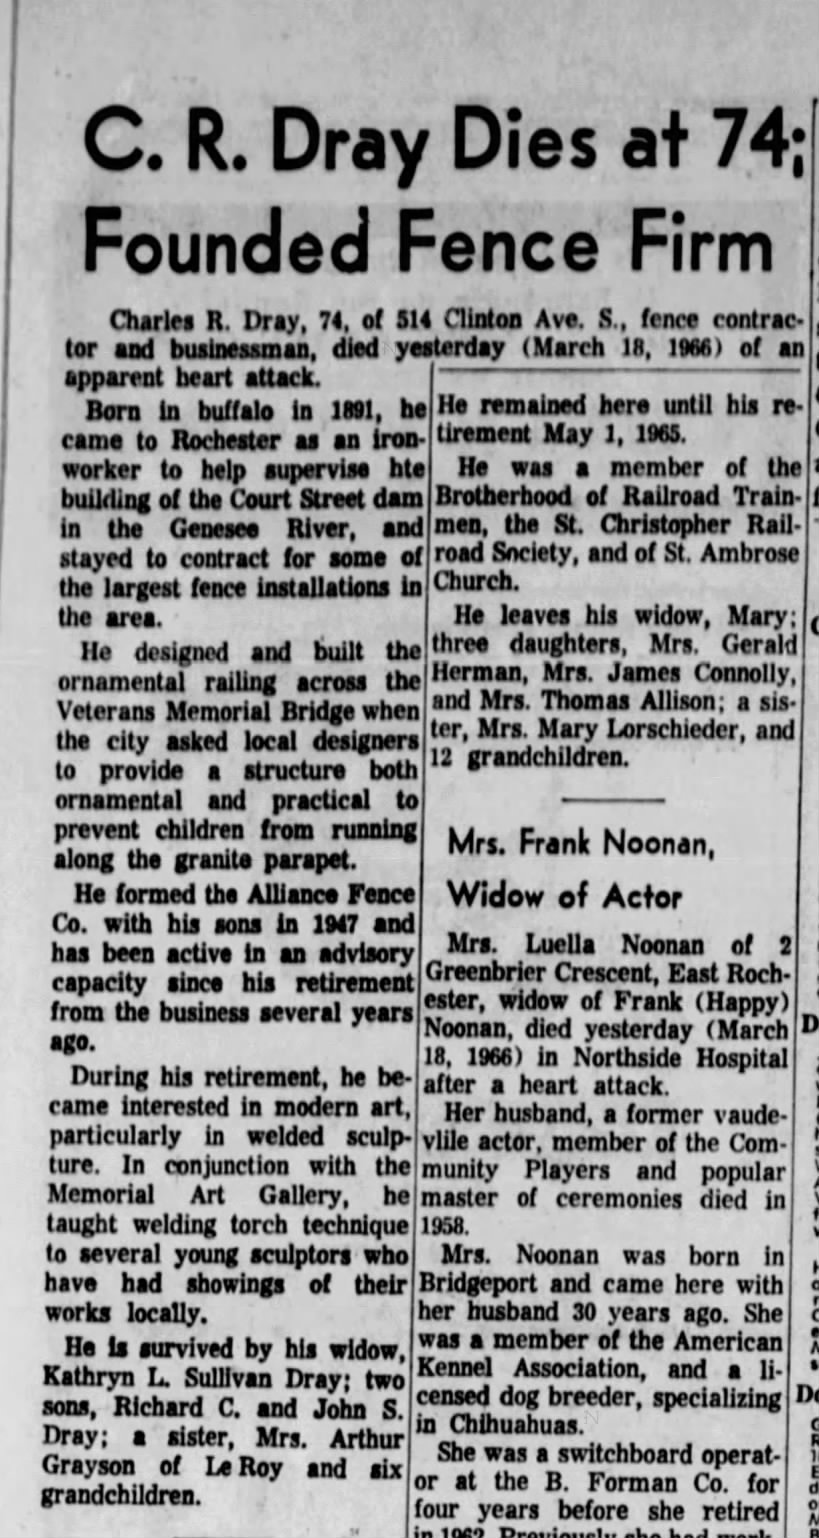 C R Dray - 19 March 1966
Column 1 and 2